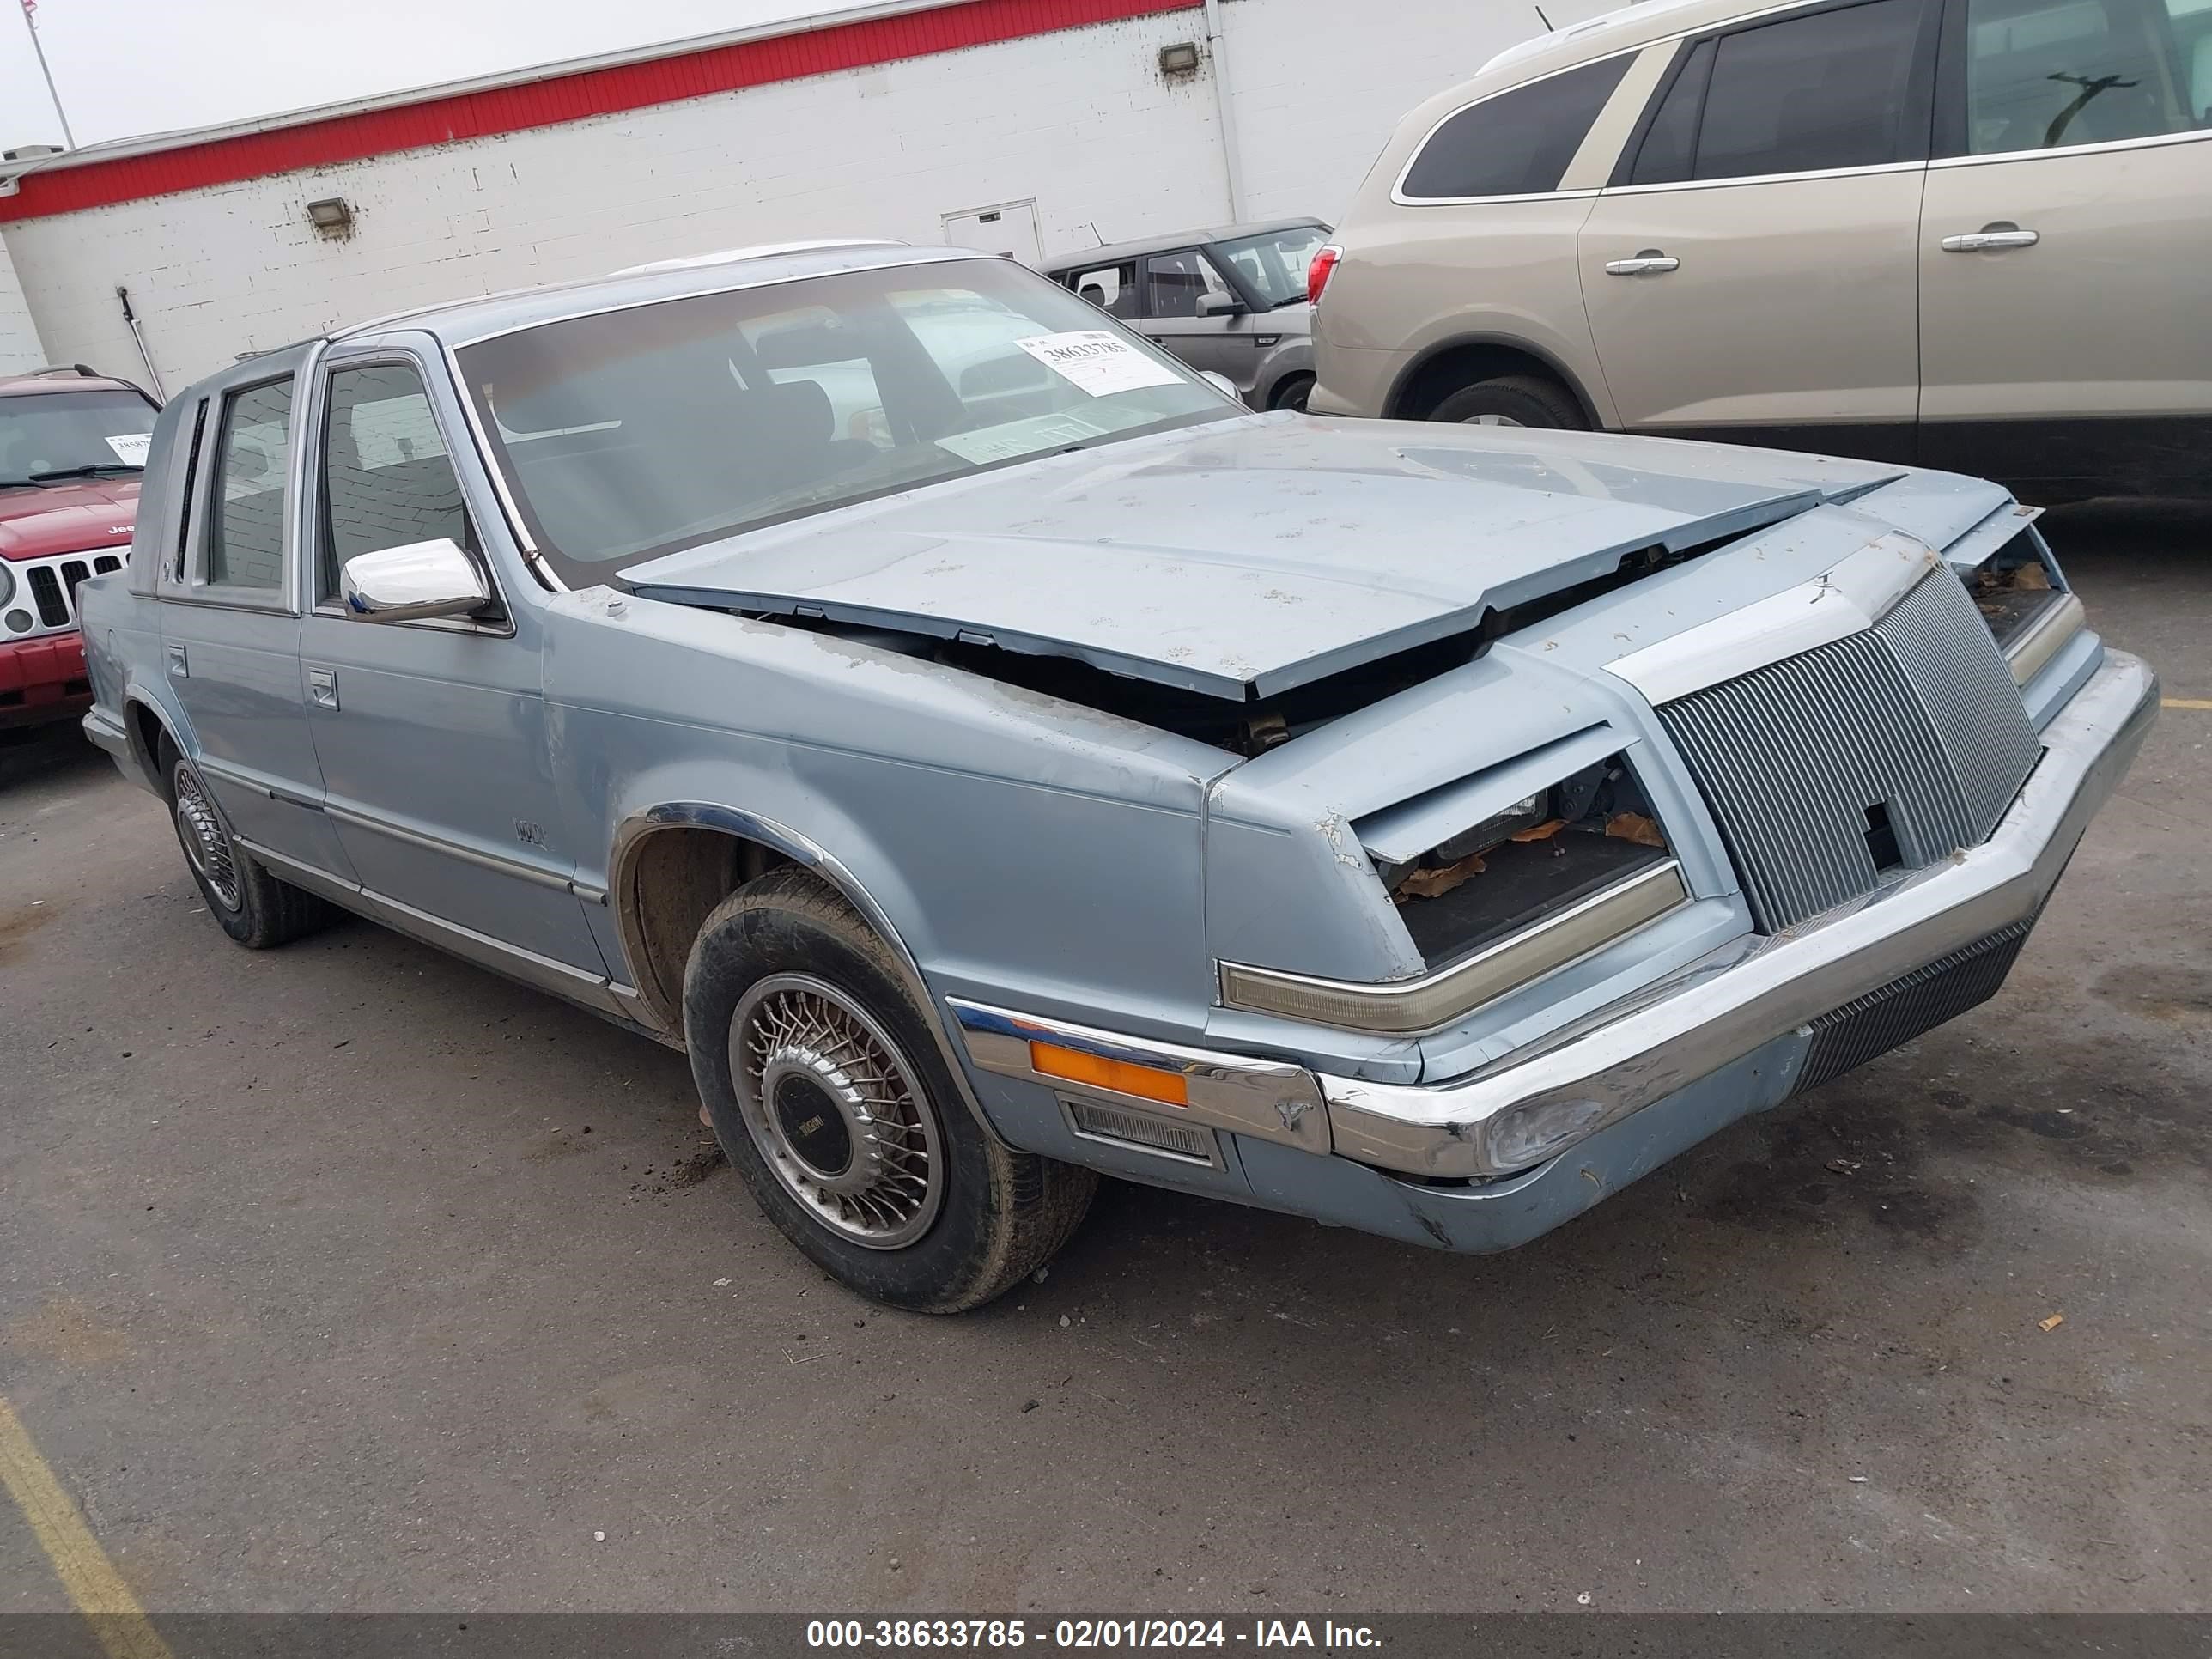 vin: 1C3XY56R3MD248174 1C3XY56R3MD248174 1991 chrysler imperial 3300 for Sale in 84401, 1800 South 1100 West, Ogden, Utah, USA